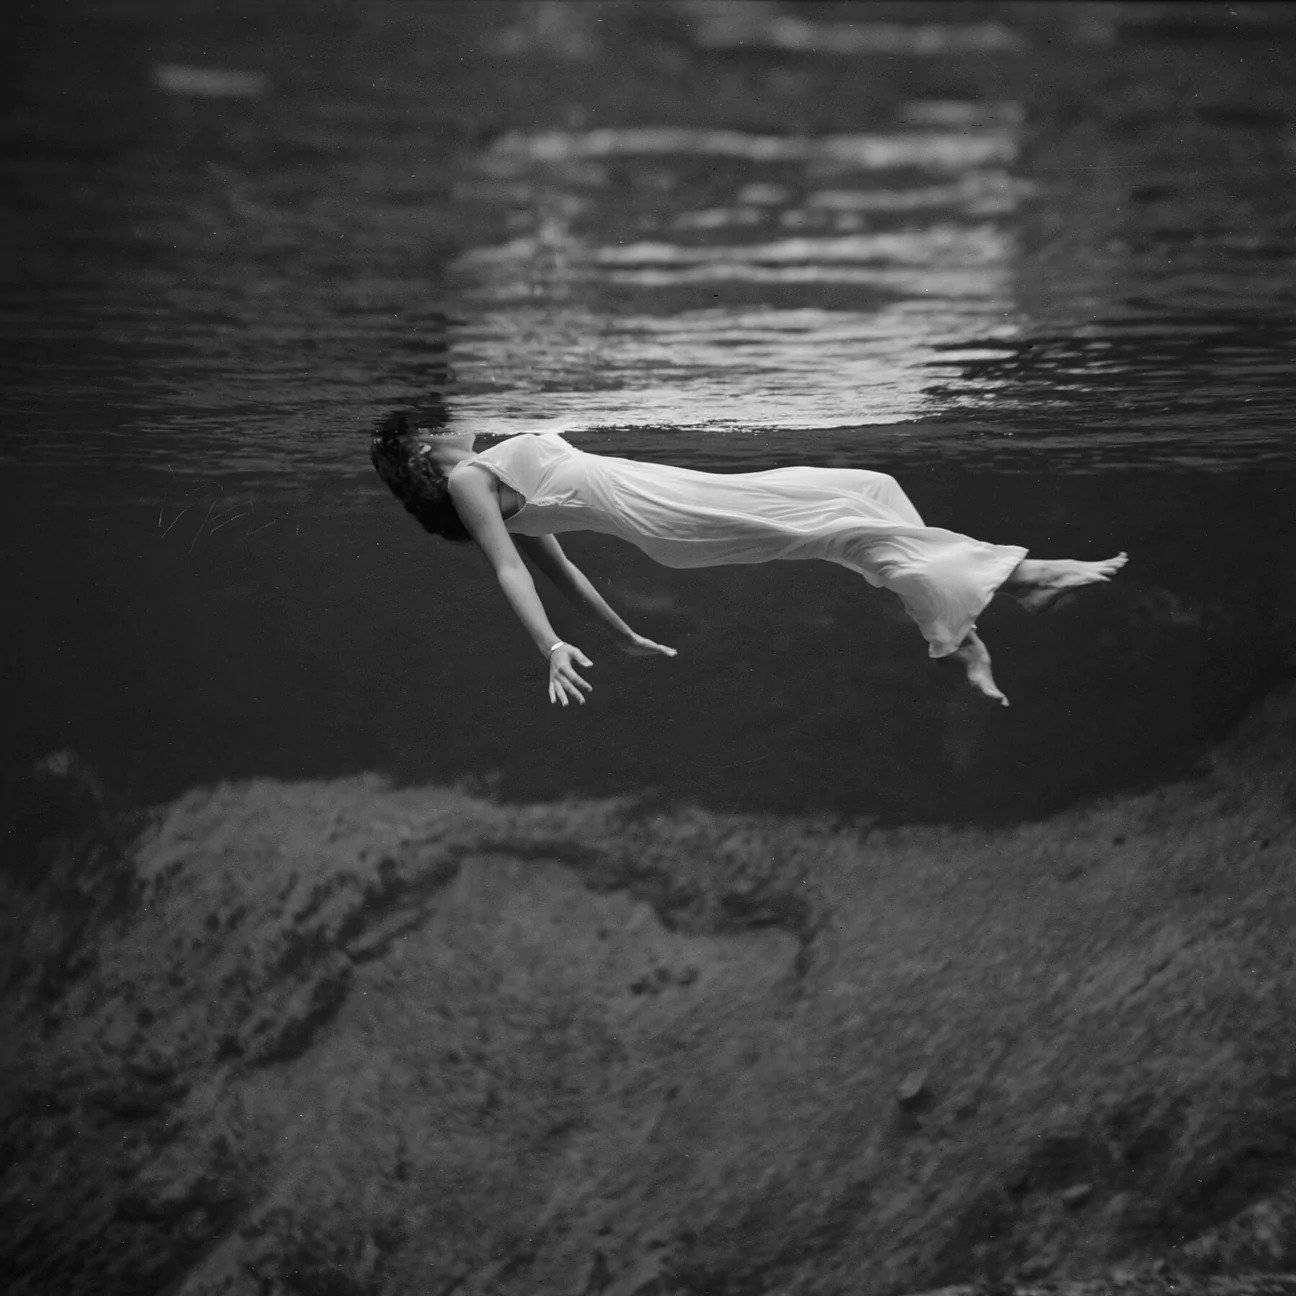 Floating in Water by Toni Frissell 